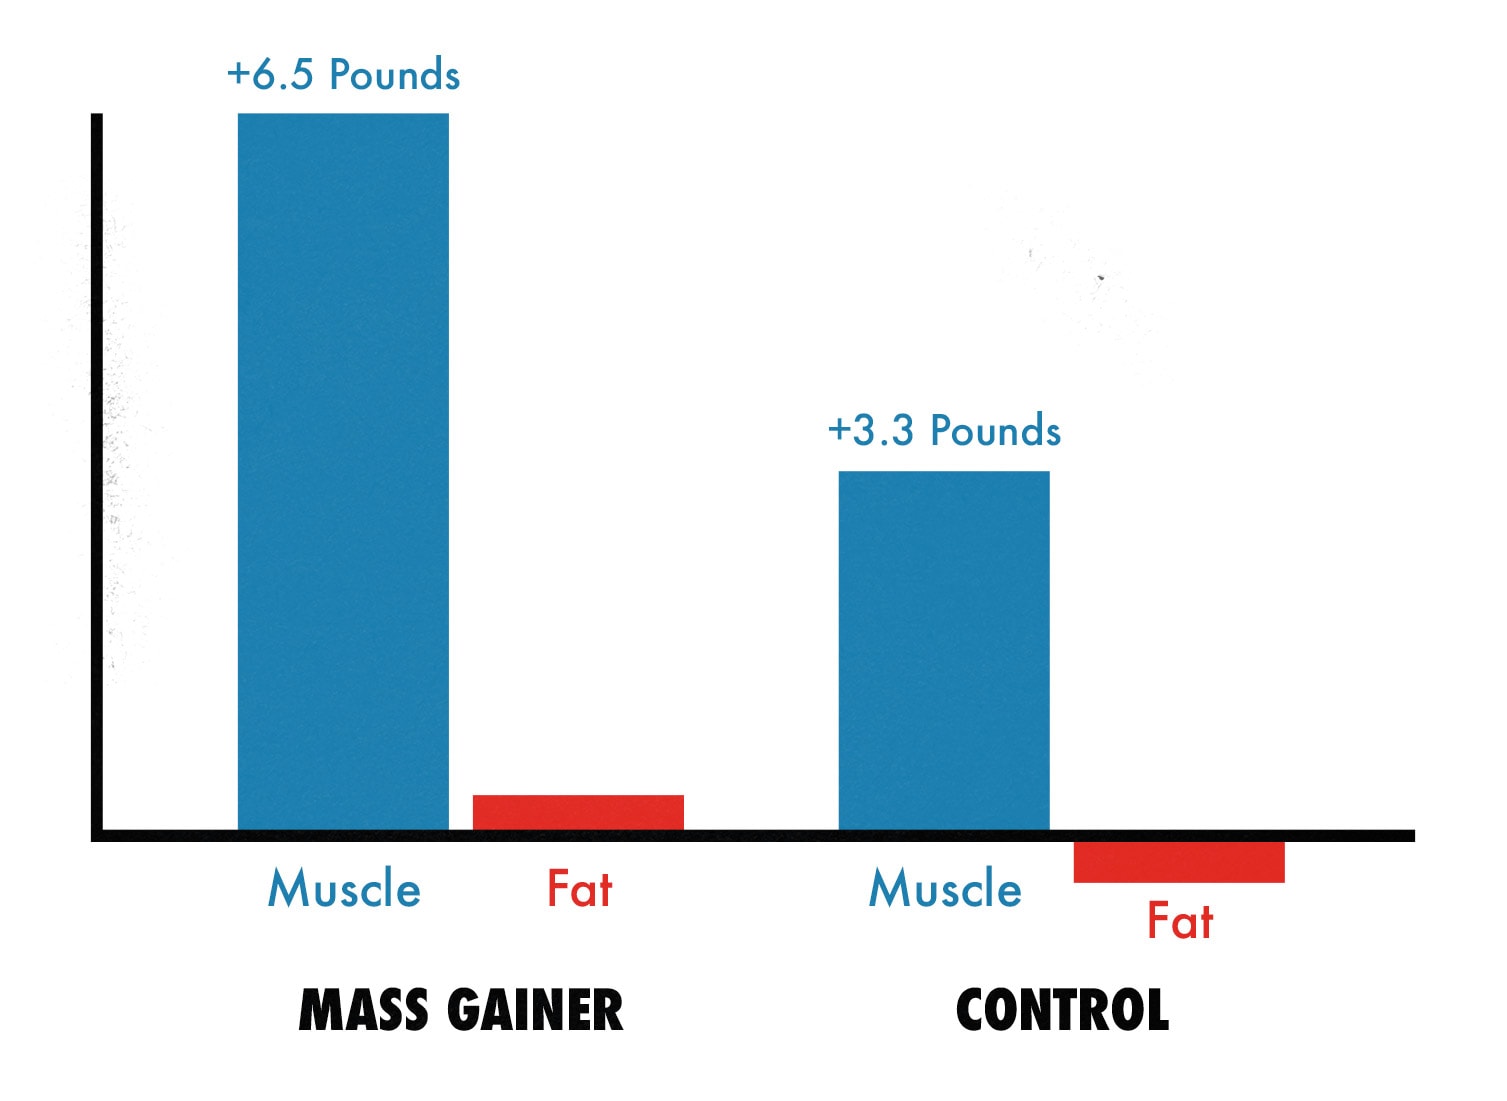 A graph showing the results of a study on mass gainers, showing muscle growth with barely any fat gain.